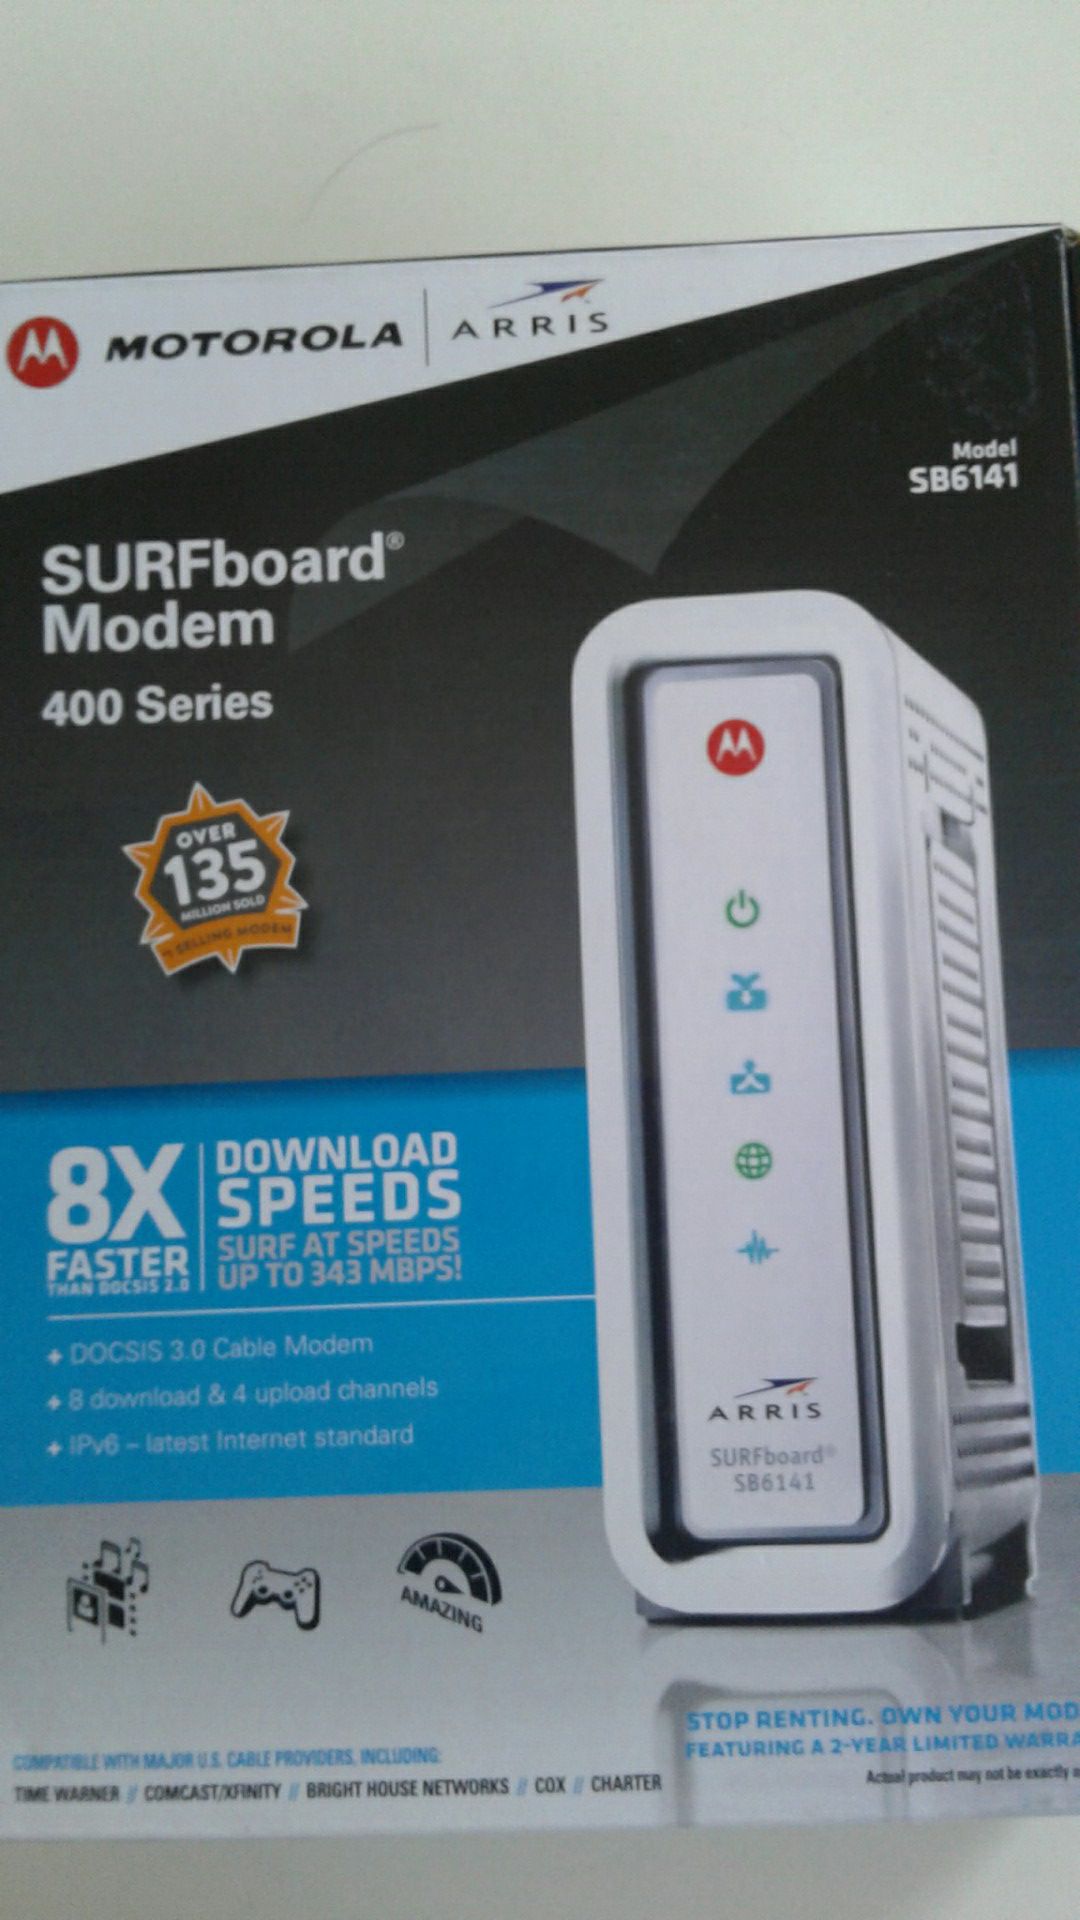 Motorola surfboard modem sb6141 Cox compatible up to 343 MBPS speed